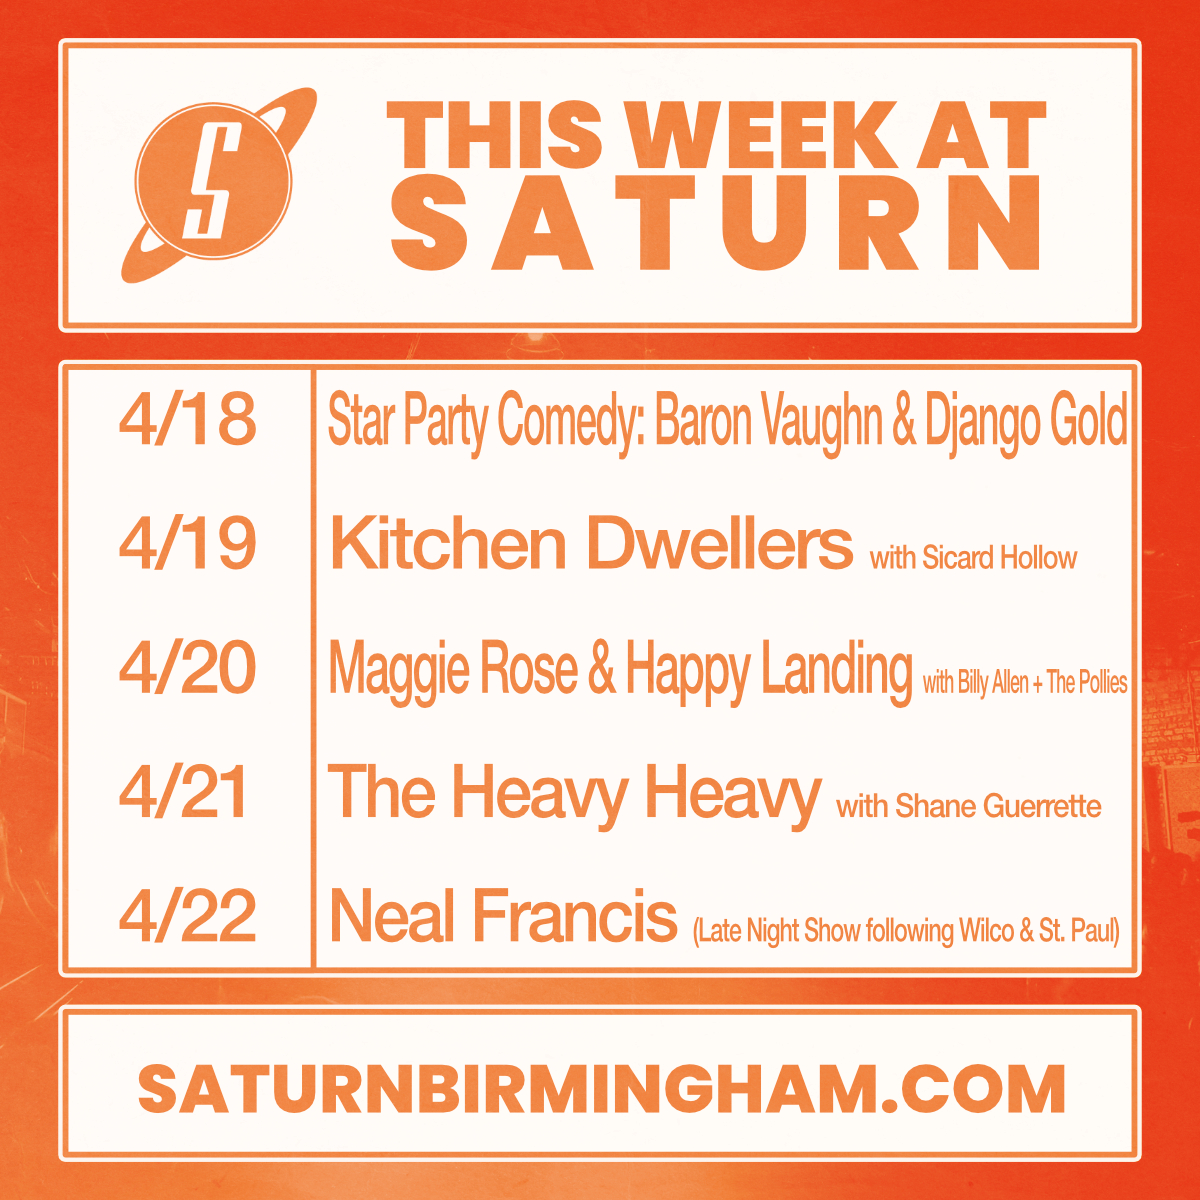 So much going on this week! Check it out! Find out more at saturnbirmingham.com 🪐